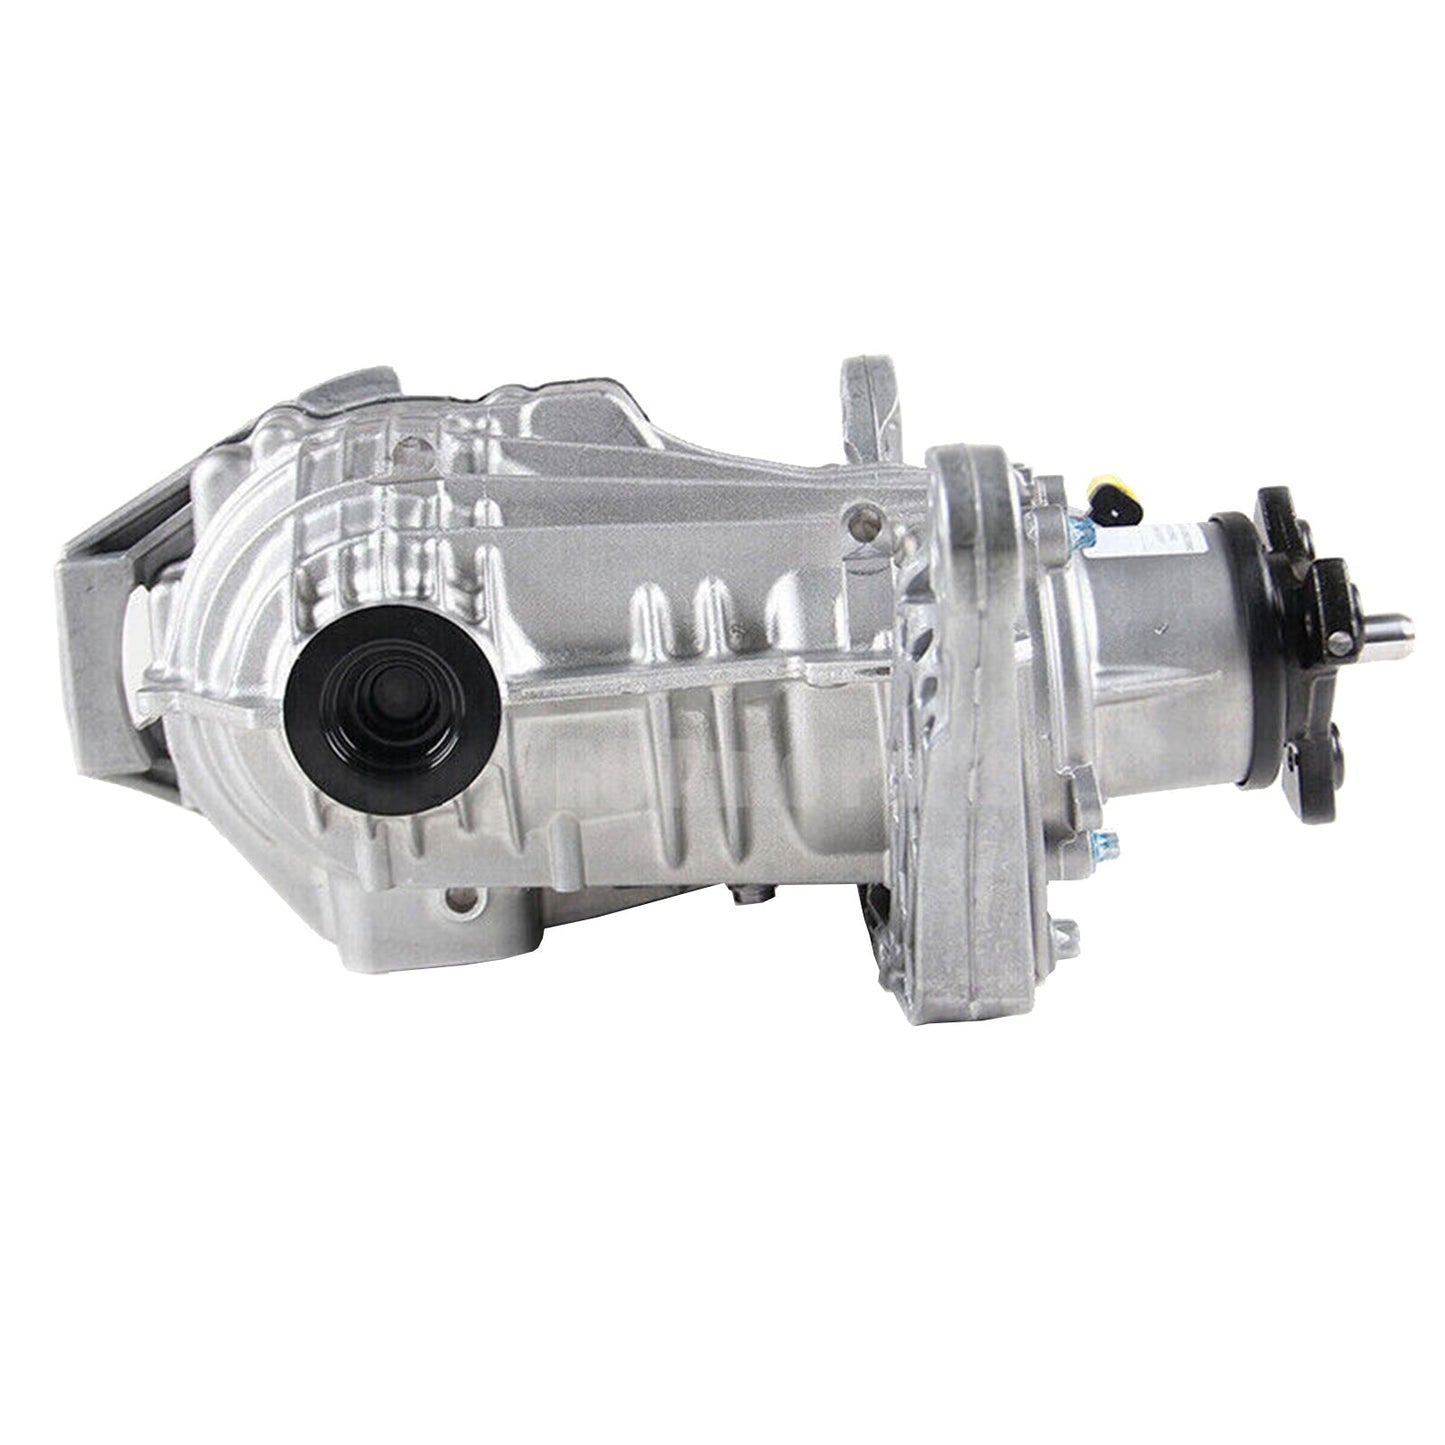 Mercedes Benz W117 CLA 220 CDI 4-MATIC Rear Differential Assembly A2463500802